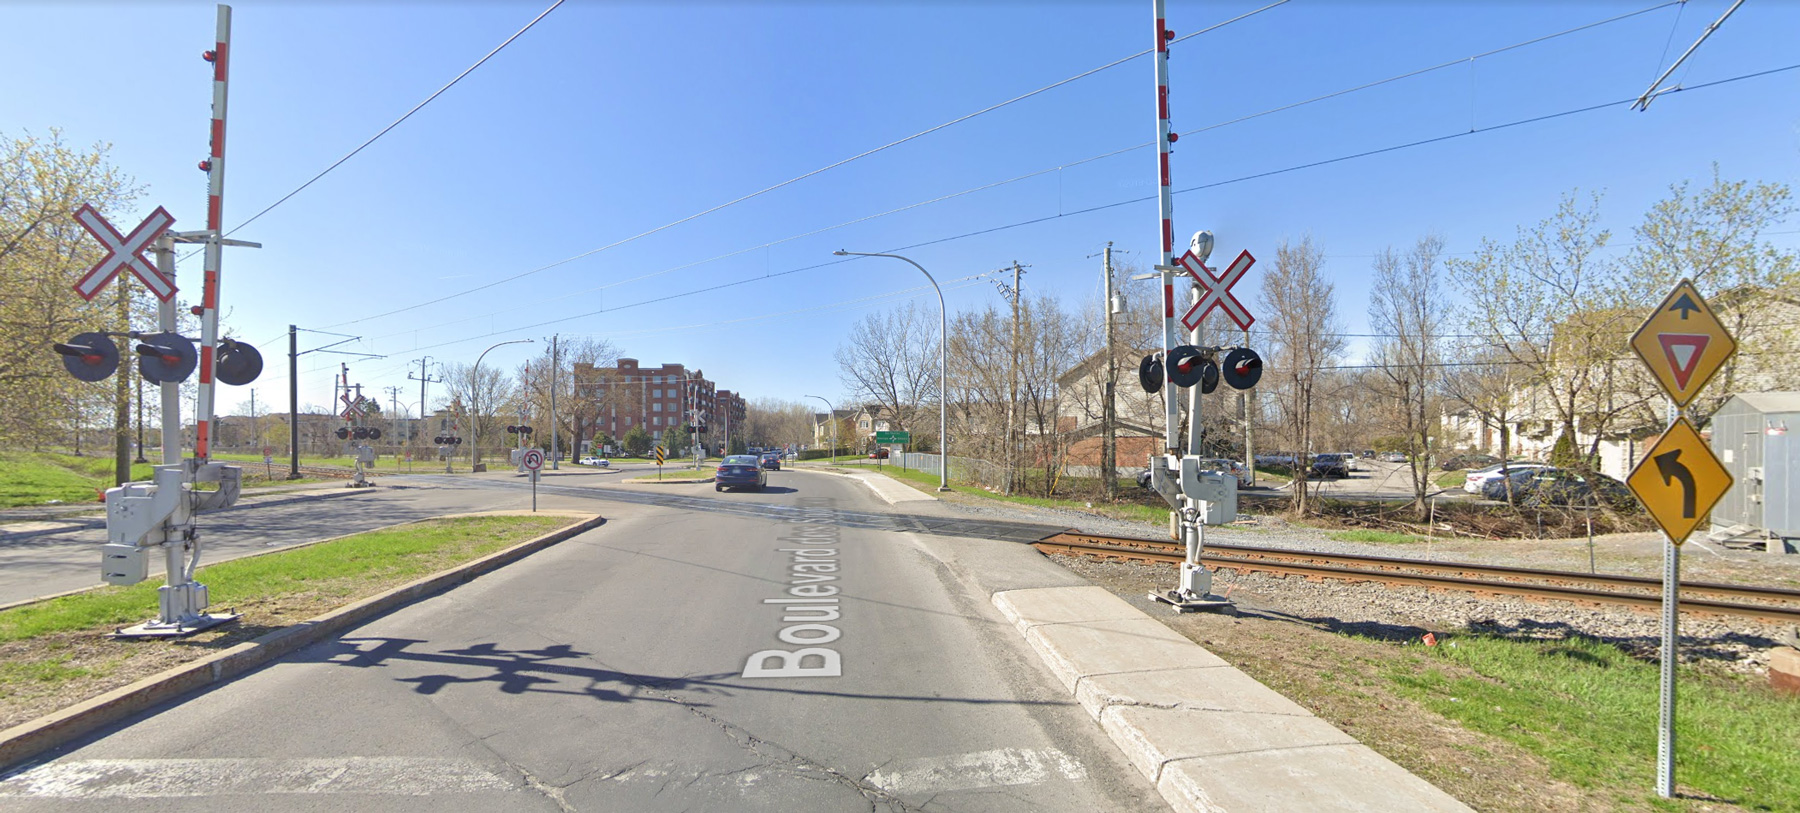 Example of a level crossing, Des Sources Blvd.